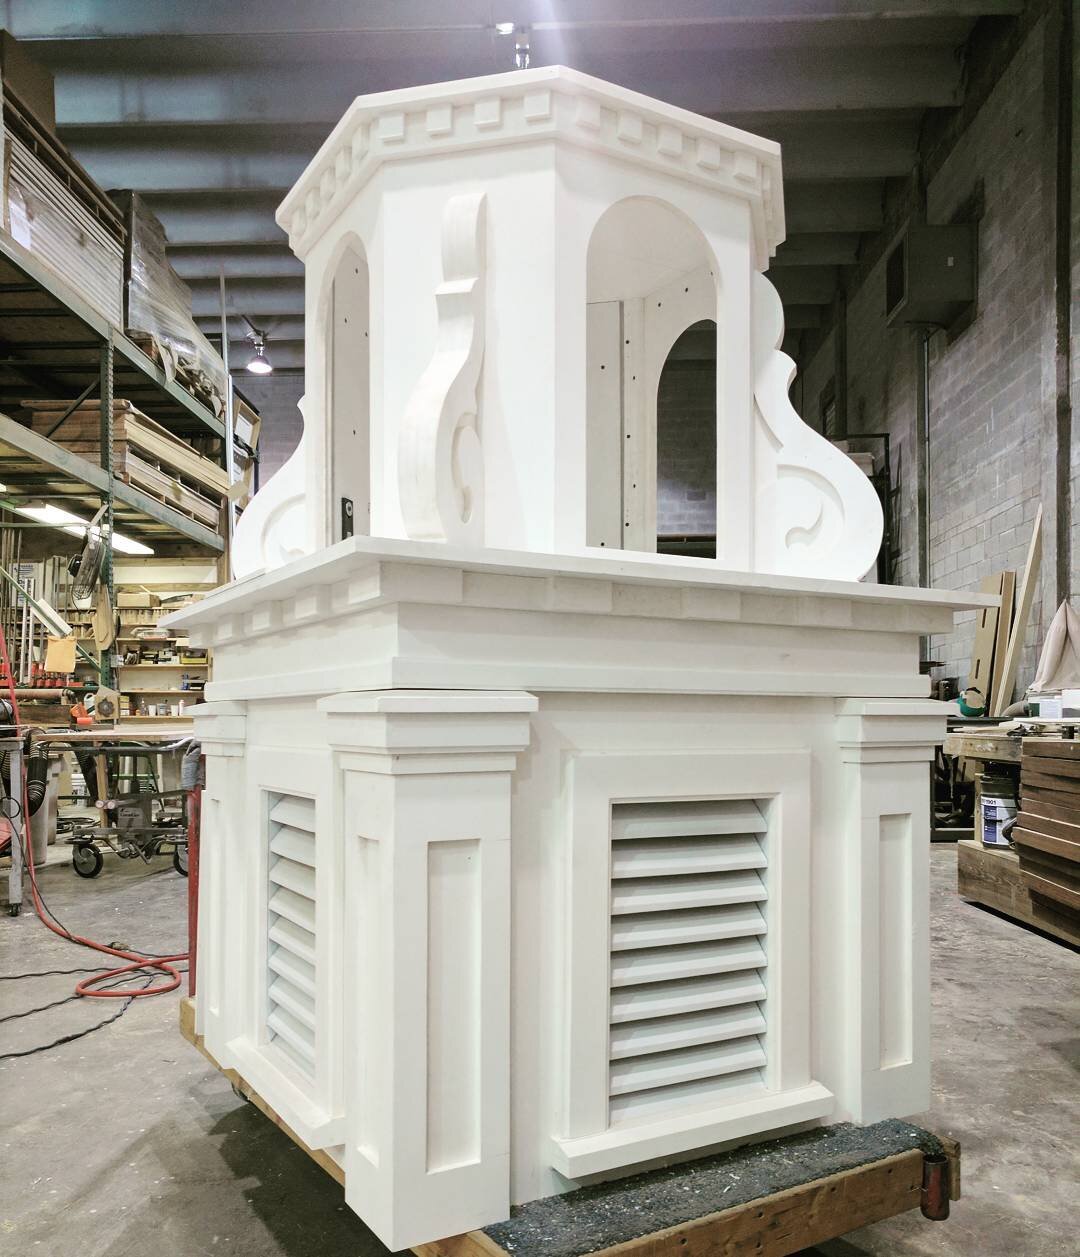 #progress is being on our #cupola project.  Here is the first look at the lower three tiers assembled. #versatex #betterbuilt #buildingwithplastic #gingerbreadhouse